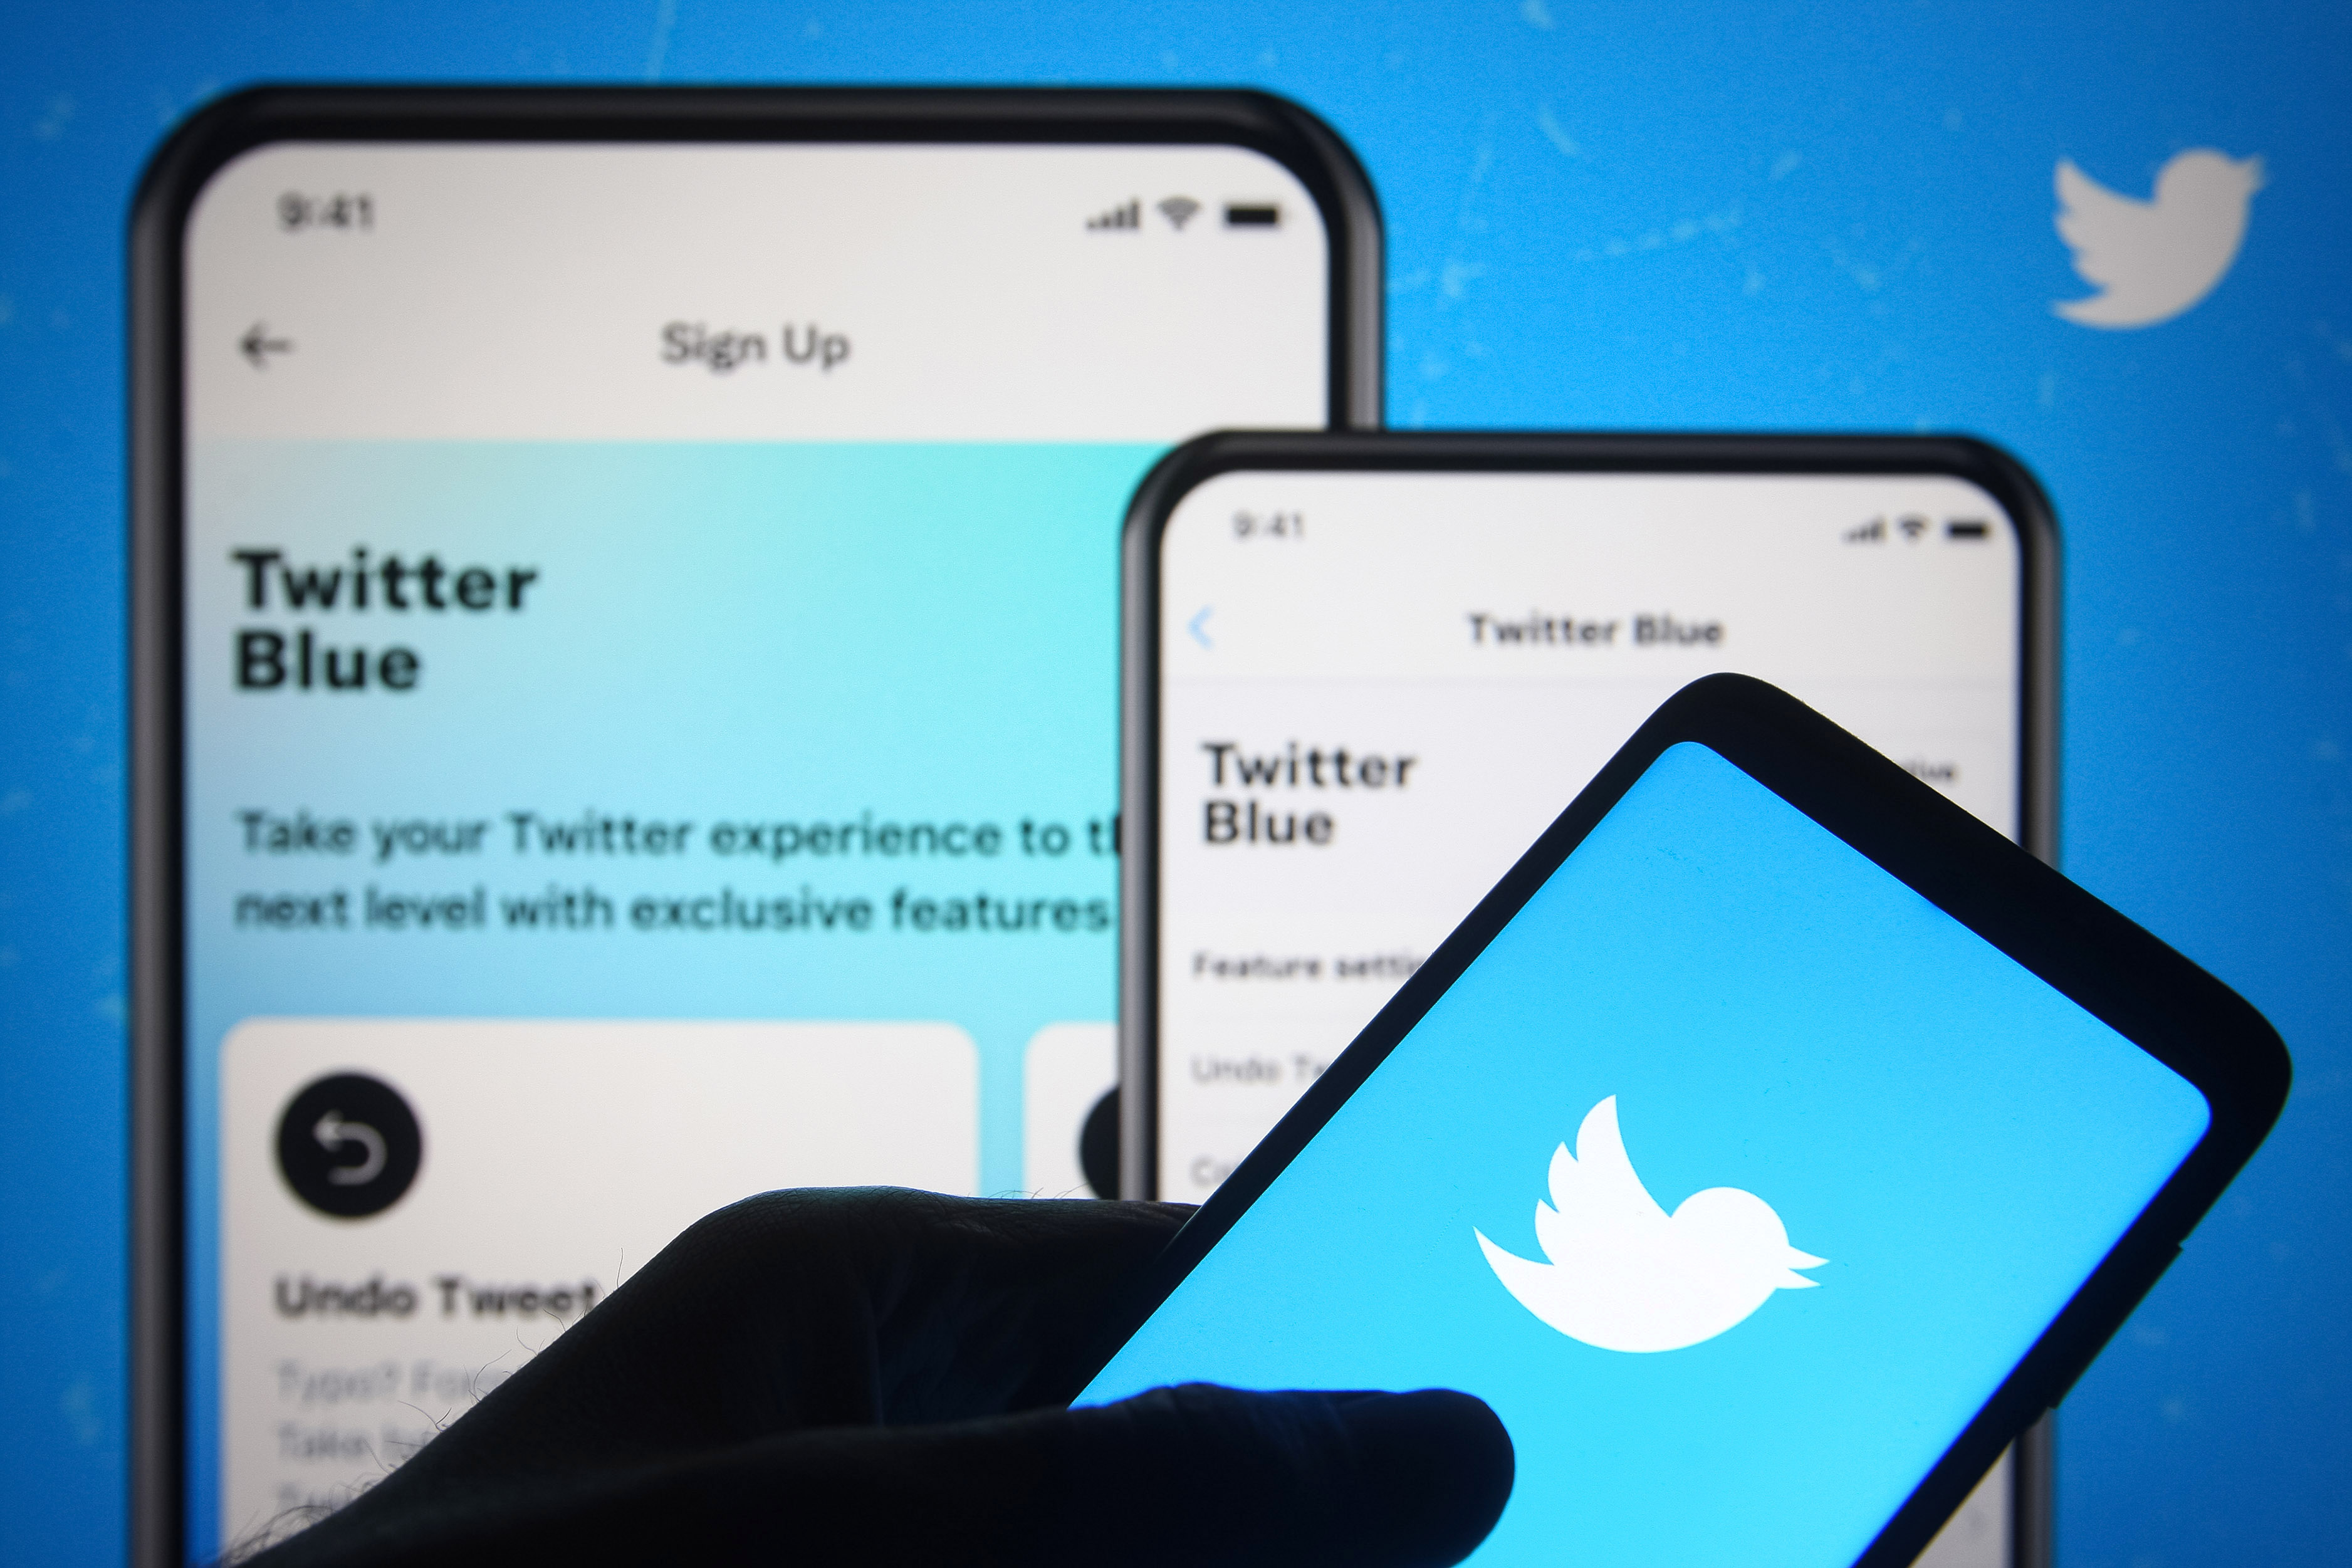 Twitter's $8 per month blue subscription with paid account verification is coming to iOS